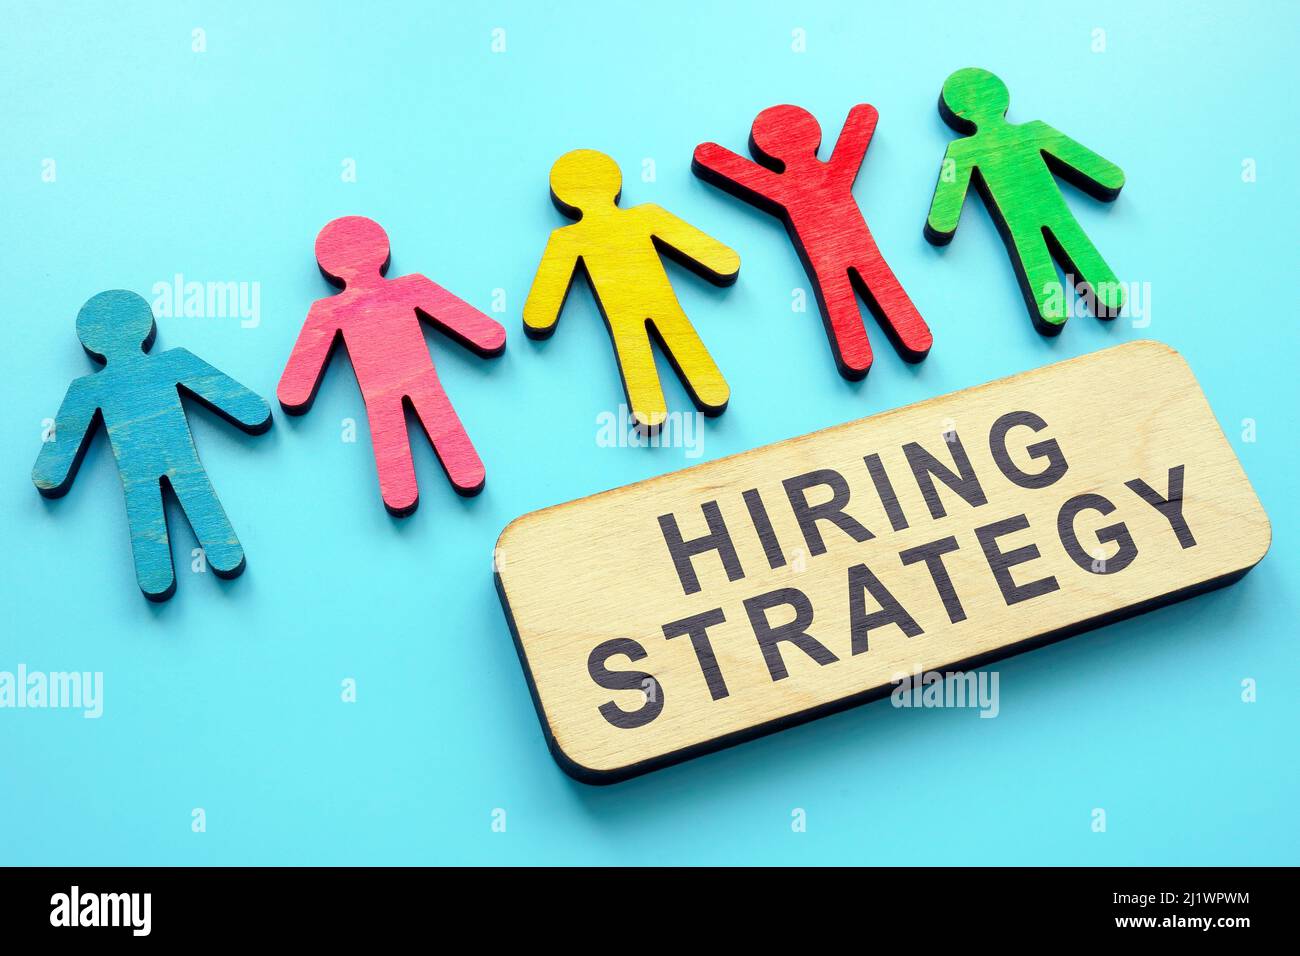 Hiring strategy sign on the board and figurines. Stock Photo